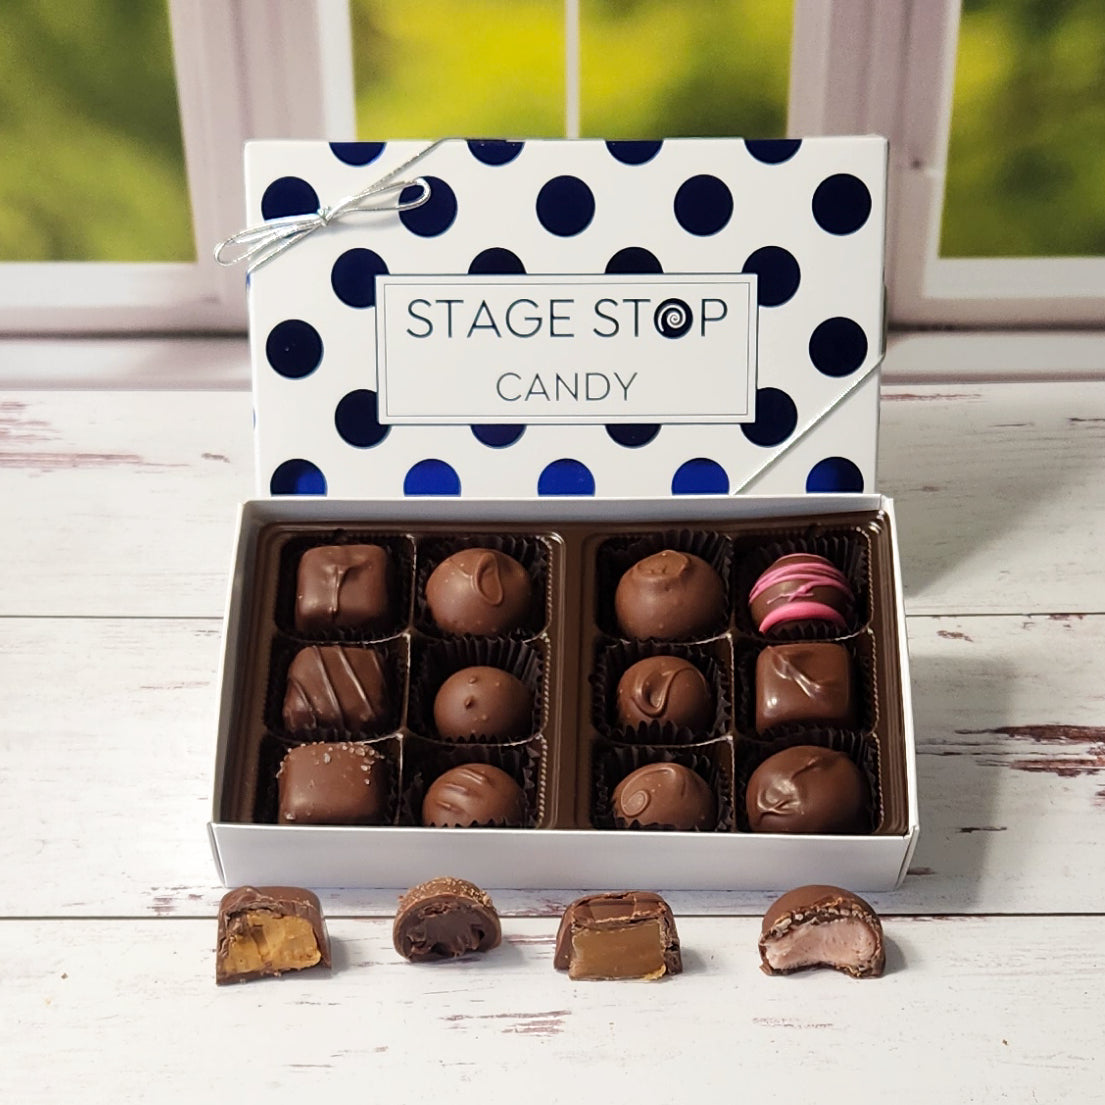 12 of our most popular candy pieces. In this all milk chocolate assortment you will find soft center creams, chewy caramels, truffles and meltaways!